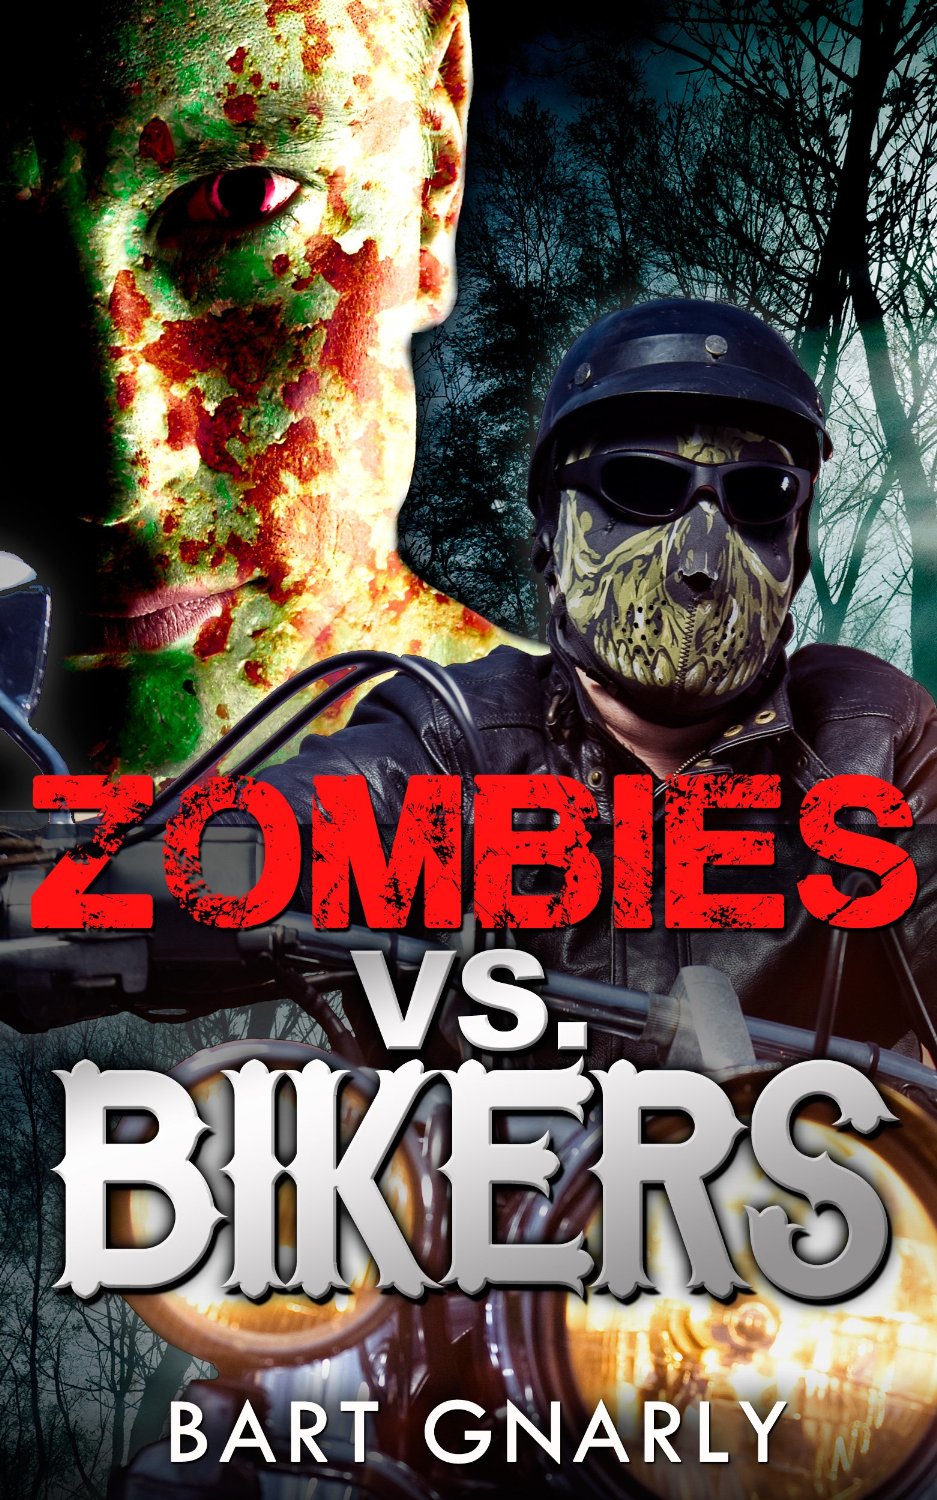 Bikers VS Zombies by Bart Gnarly